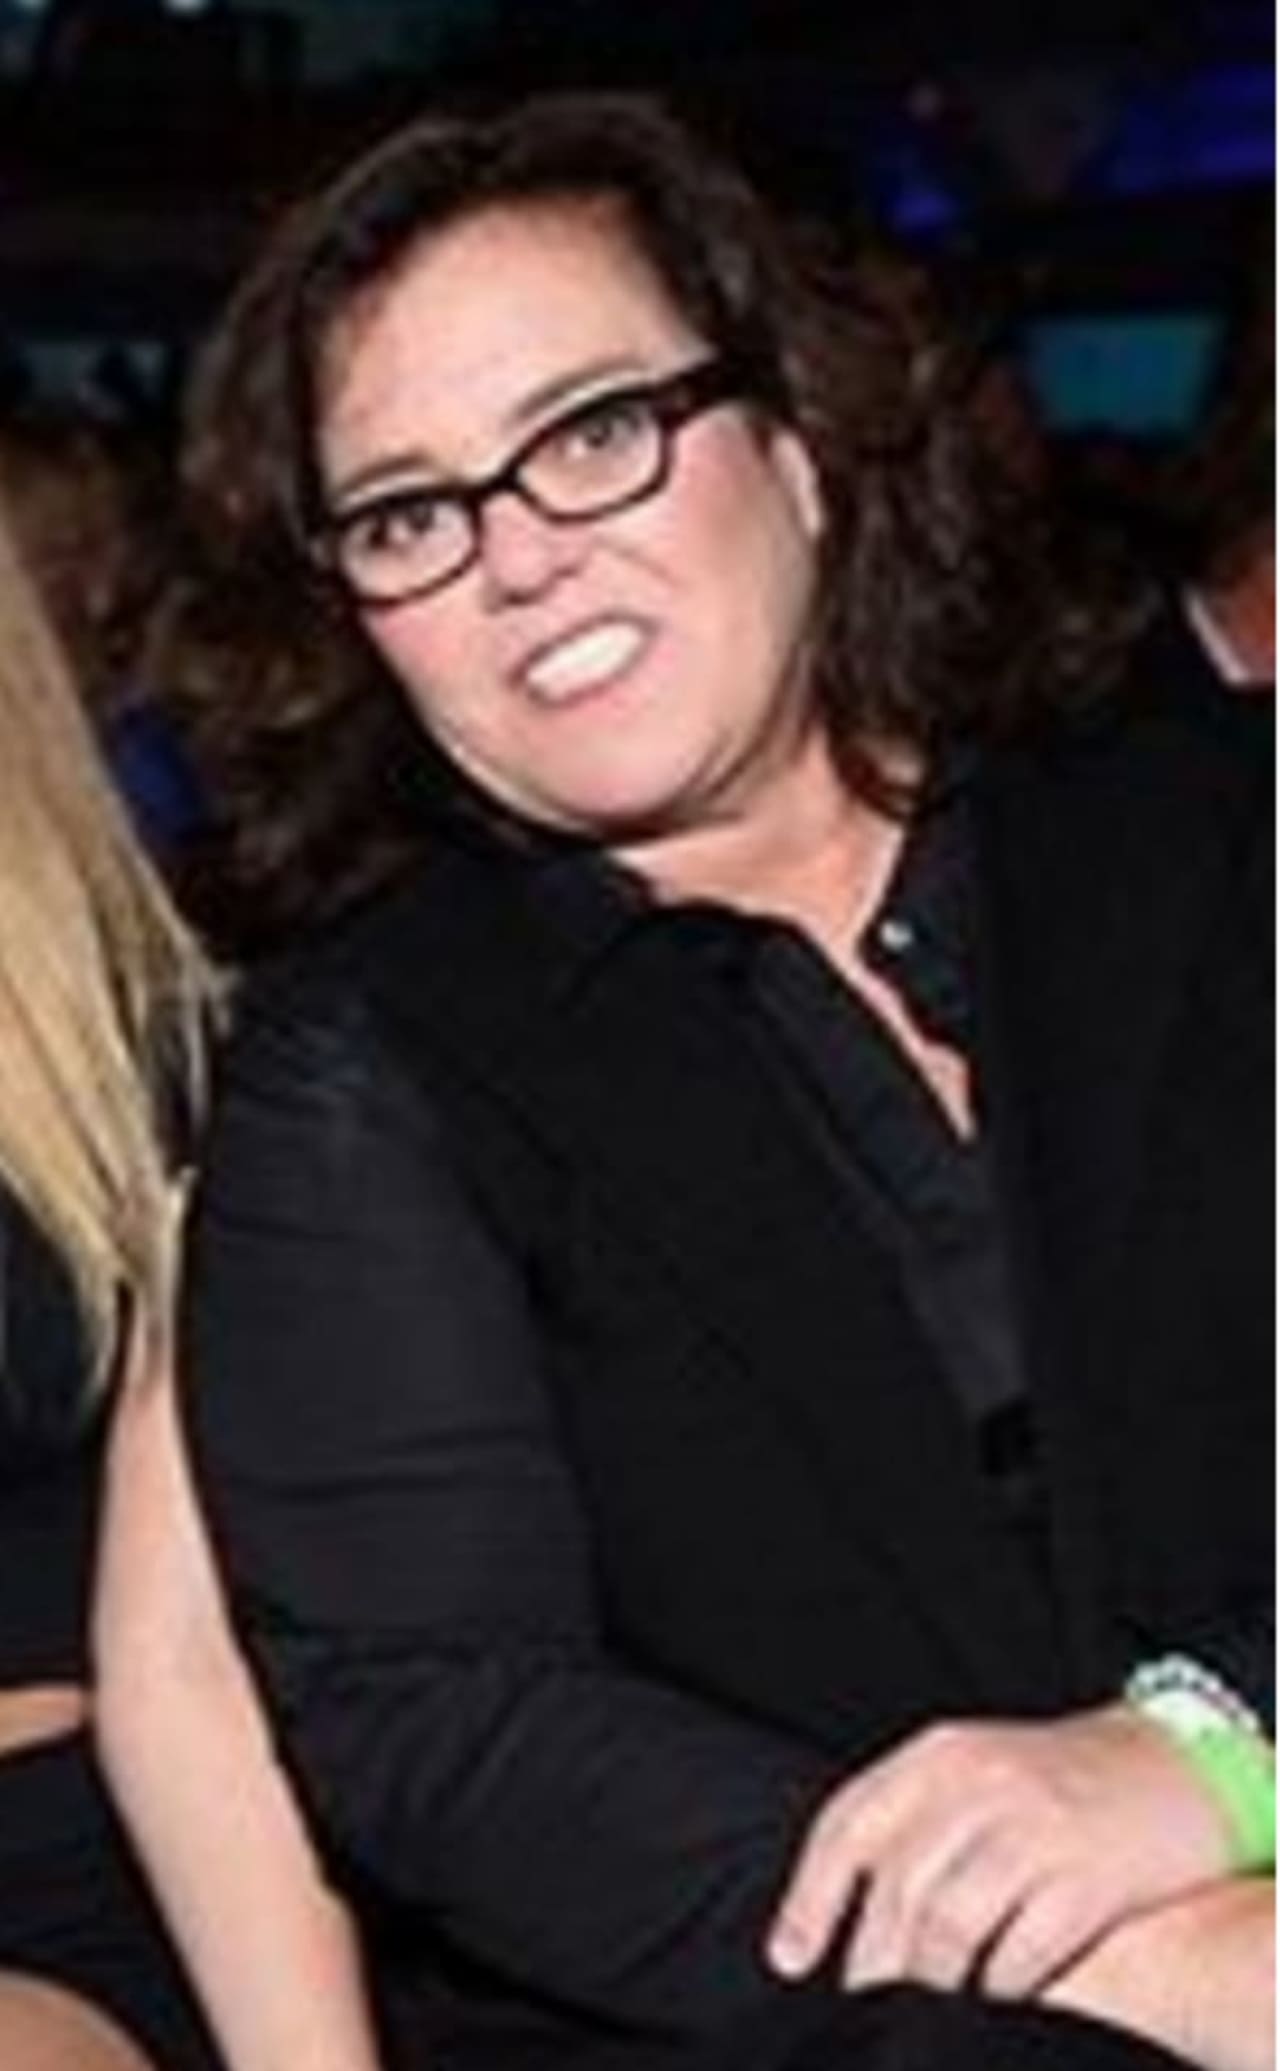 South Nyack's Rosie O'Donnell